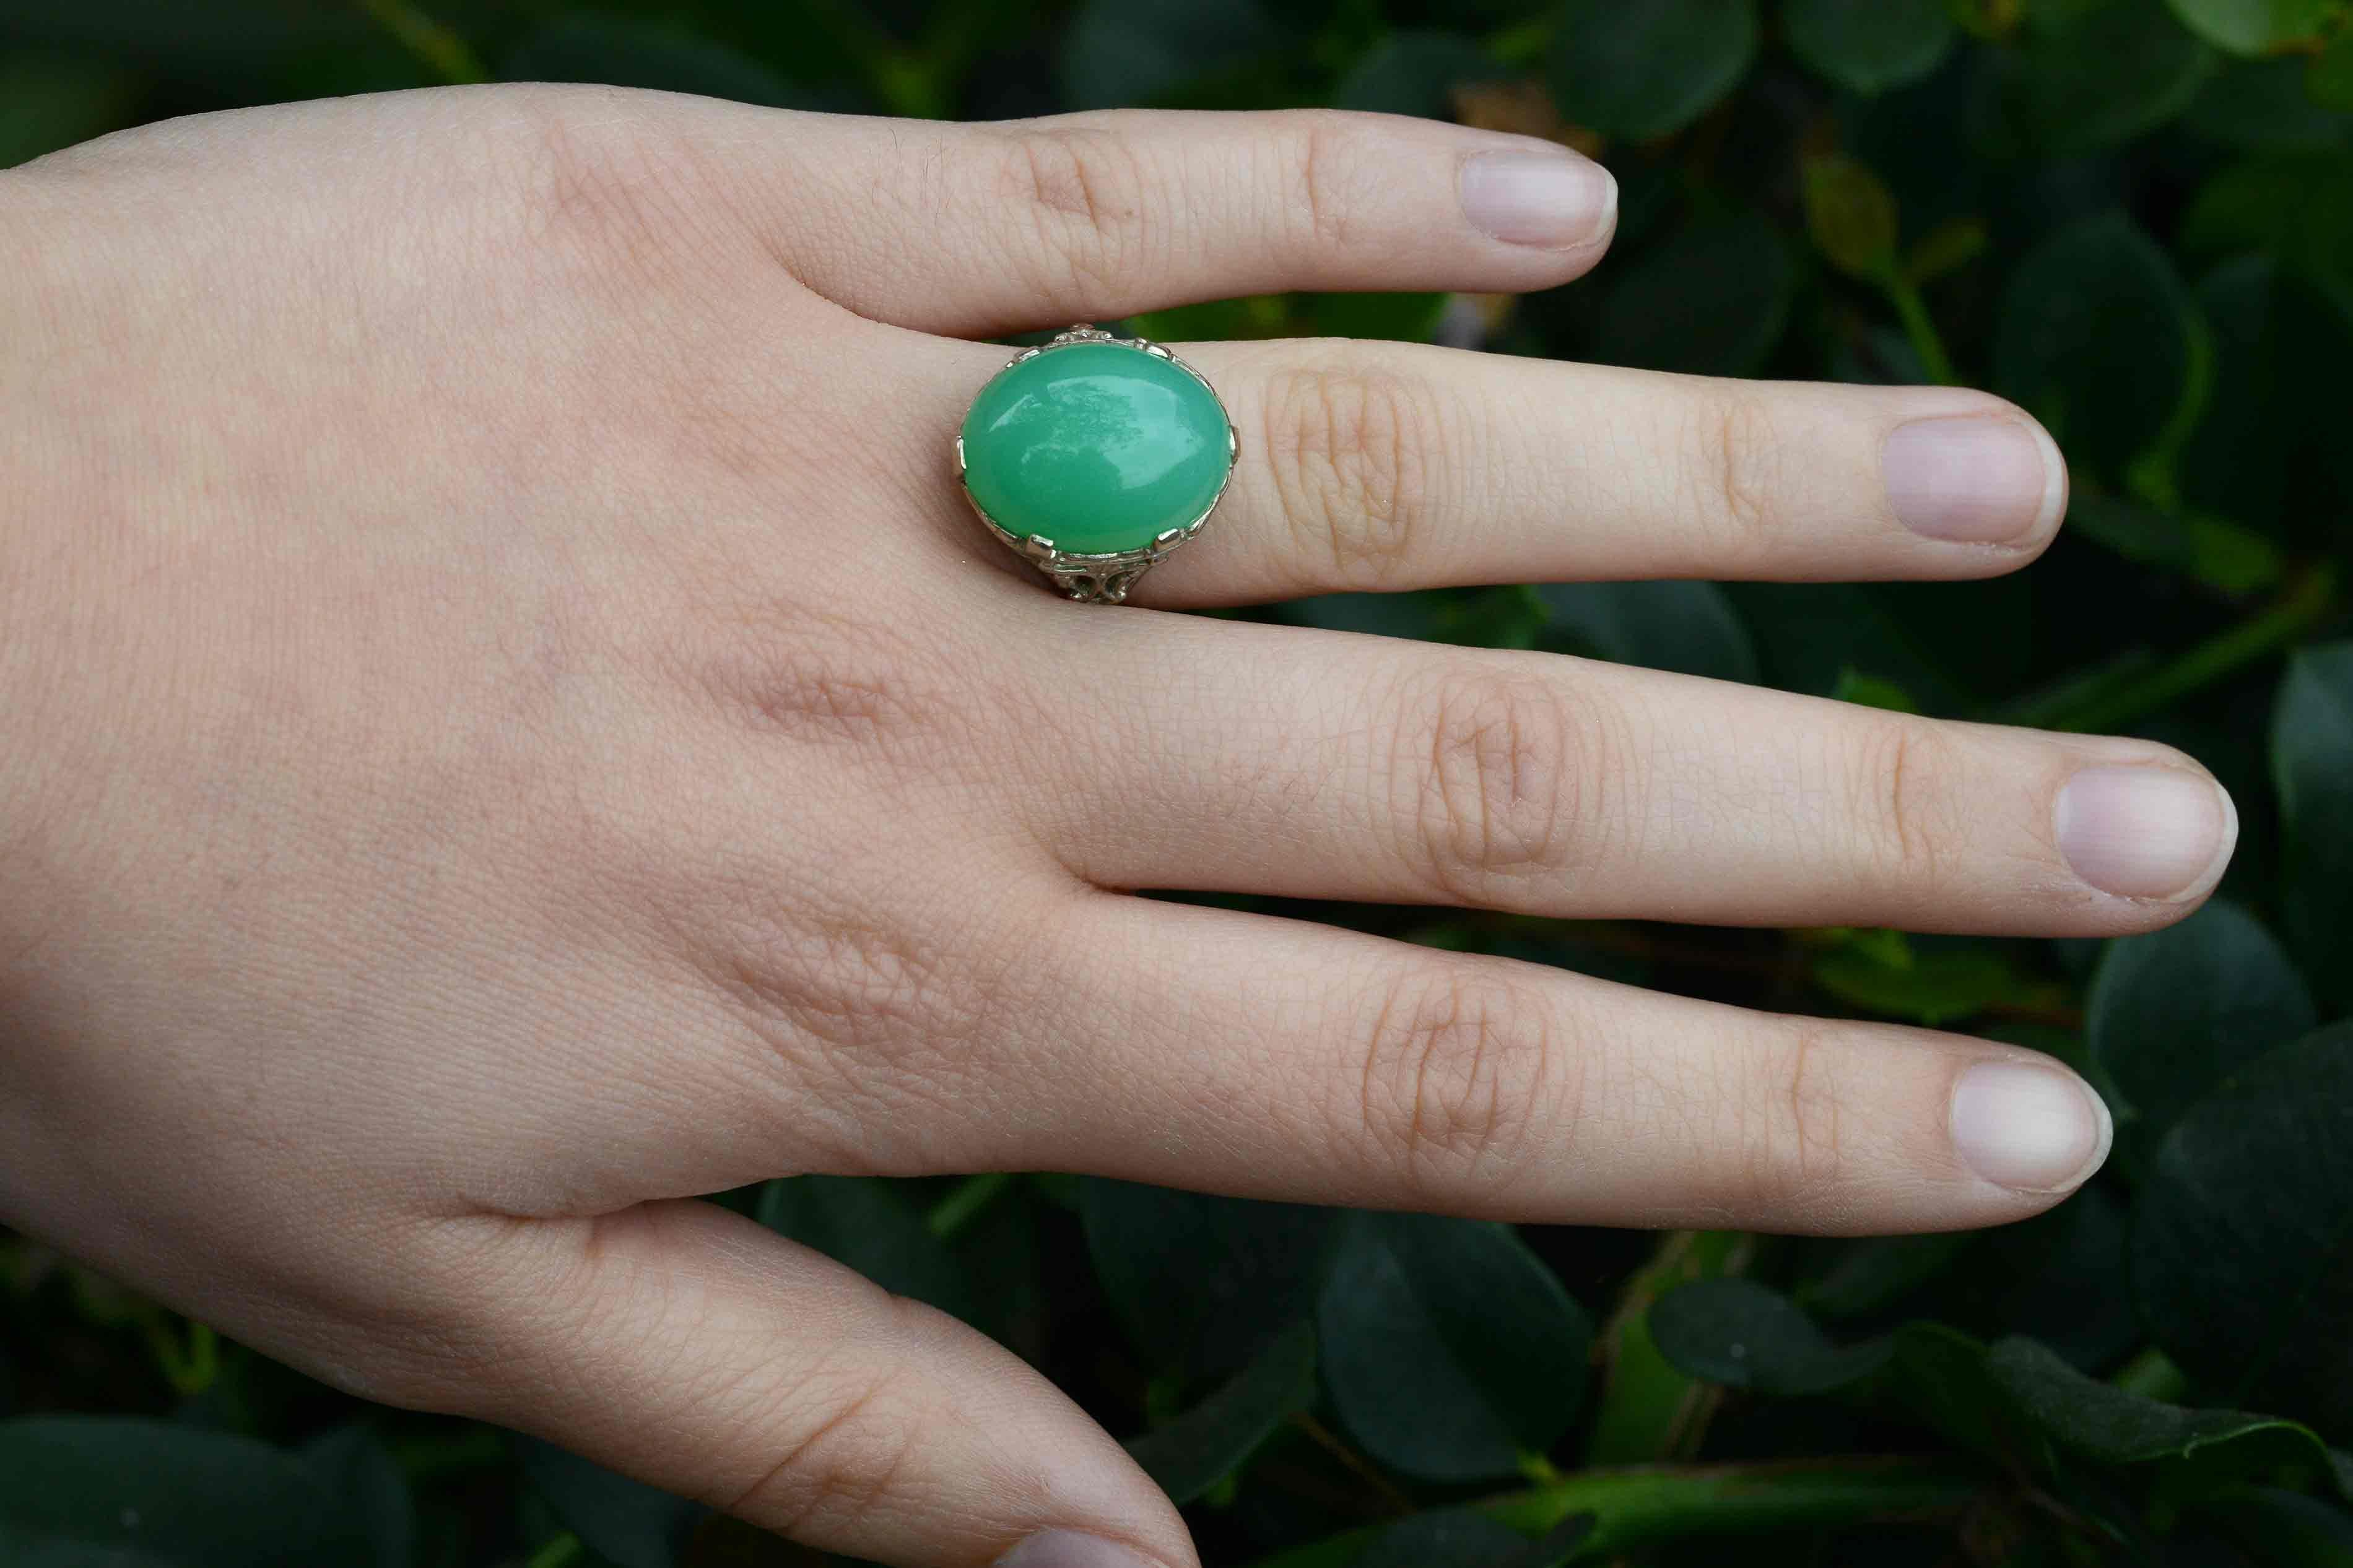 The Lubbock Victorian filigree cocktail ring. A most enchanting and soothing gemstone of a captivating and lustrous apple-green, this dome cabochon takes center stage in this Victorian inspired stunner. You will swoon over her fabulous foliate